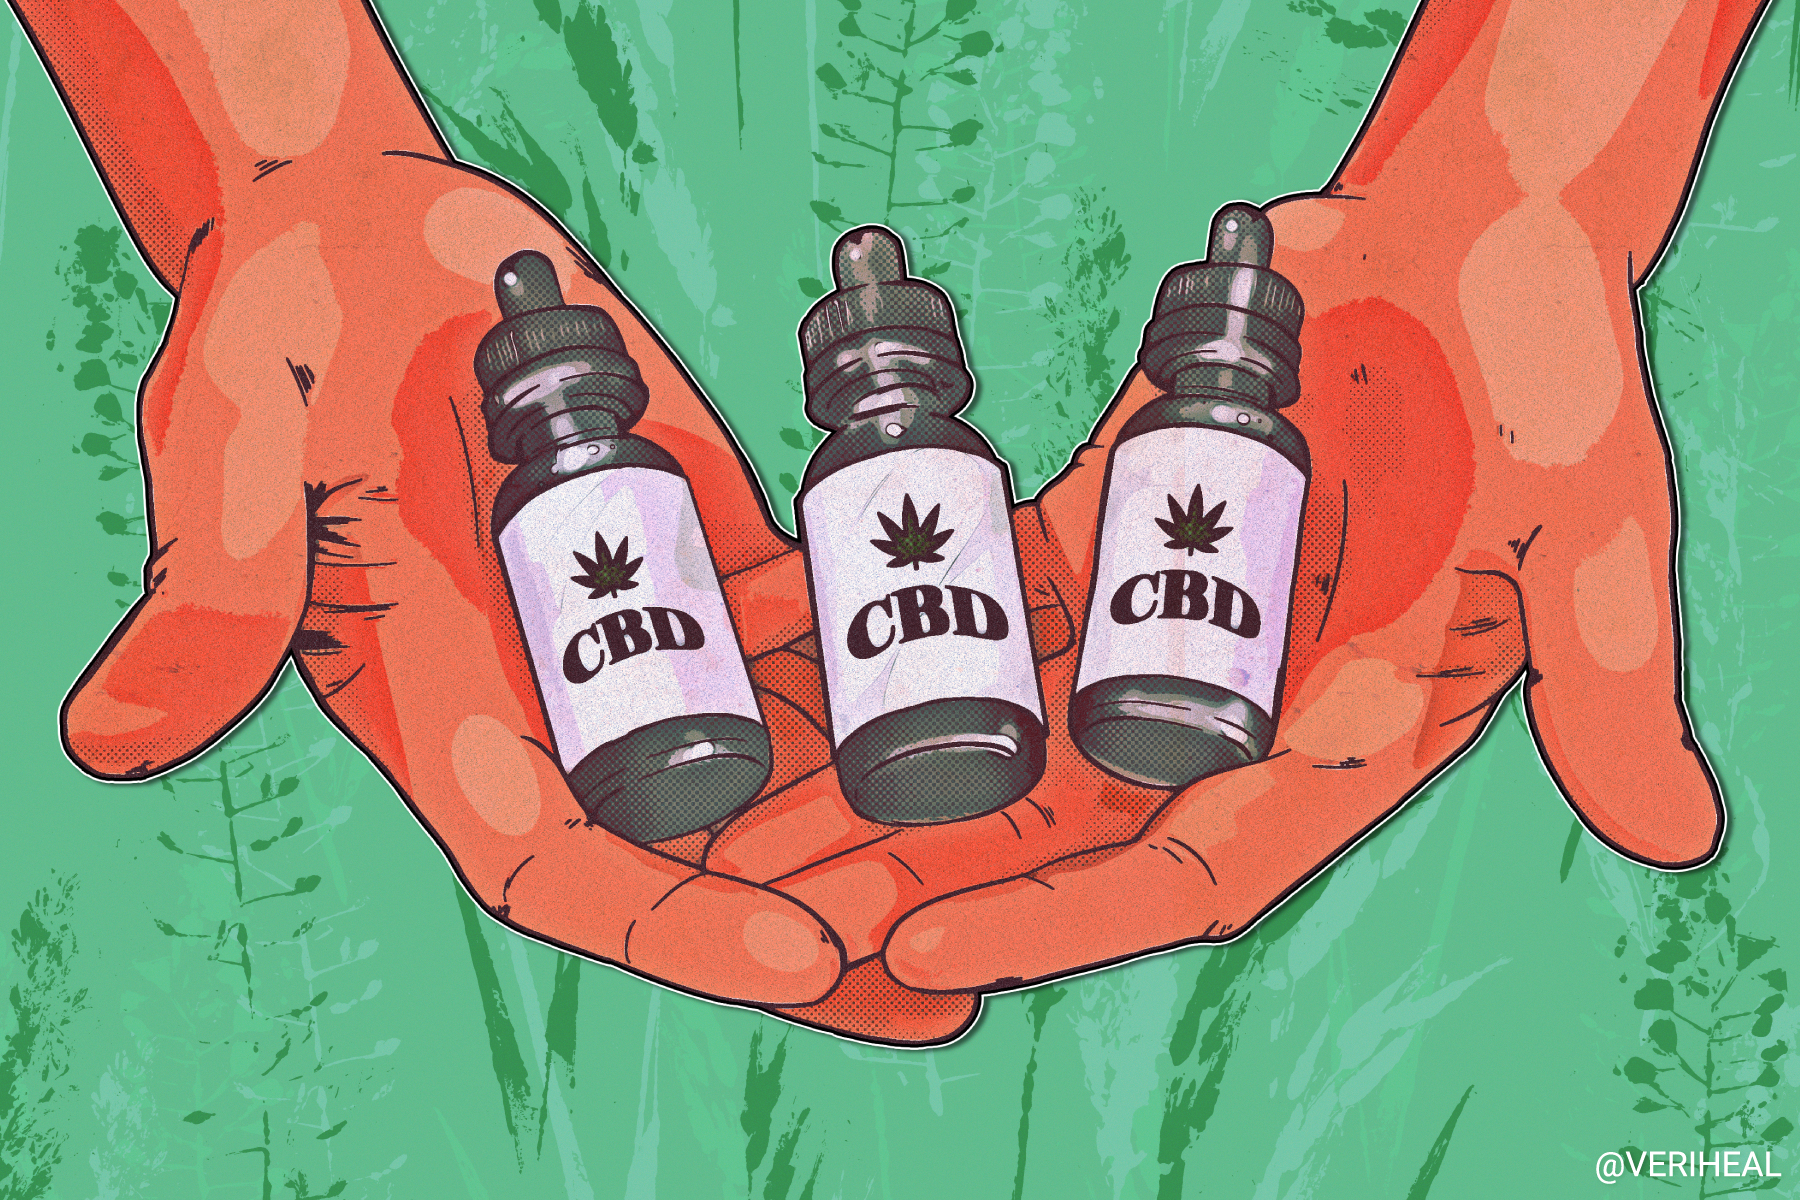 Finding Trusted CBD Brands and Avoiding “Snake Oil” Products